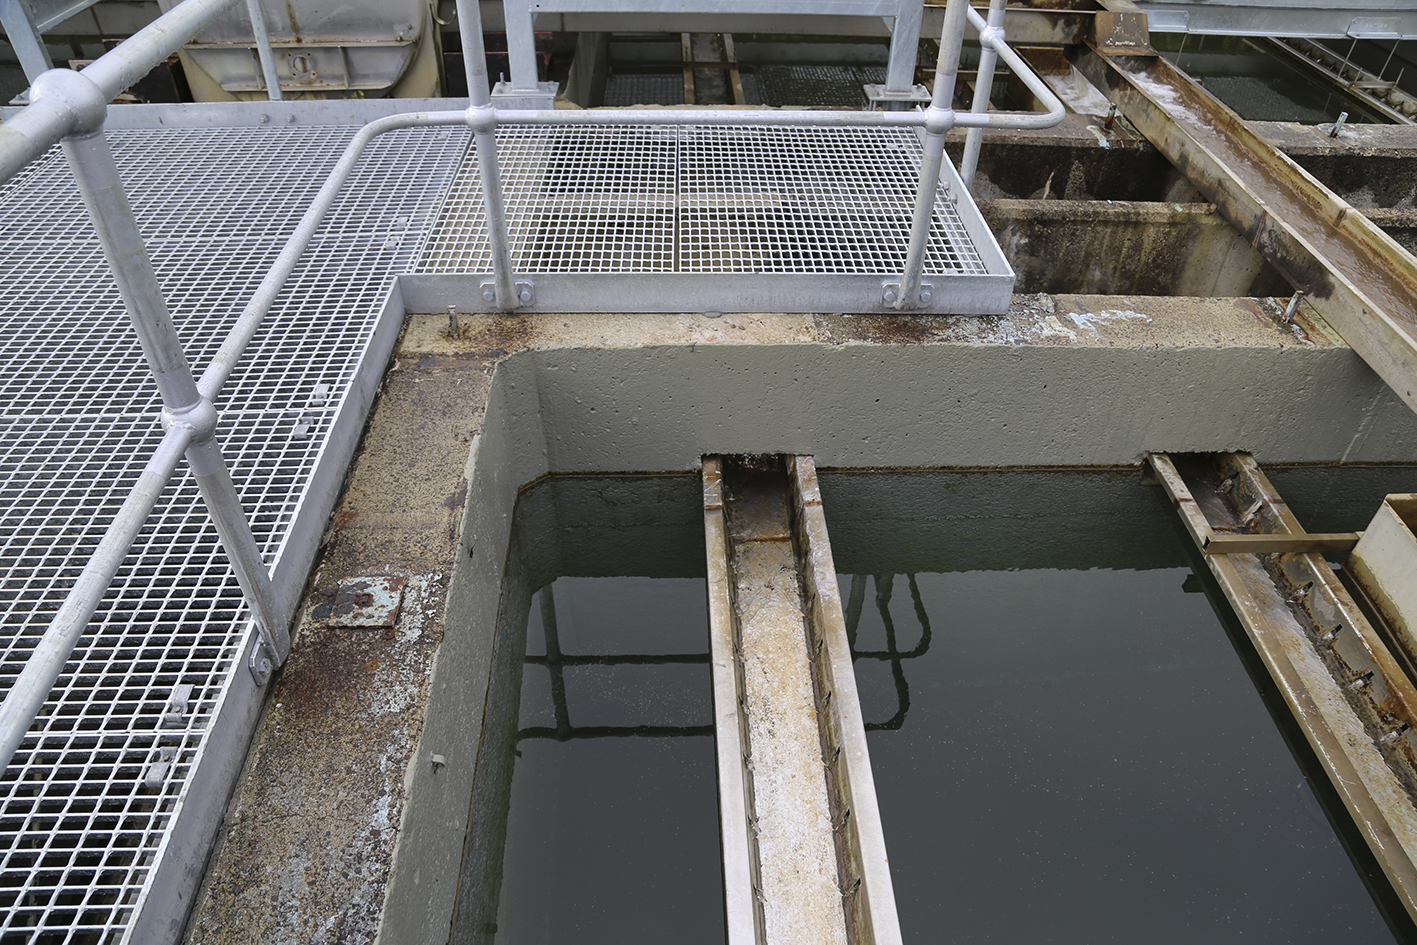 All four of the treatment plant’s clarifiers have now been refurbished